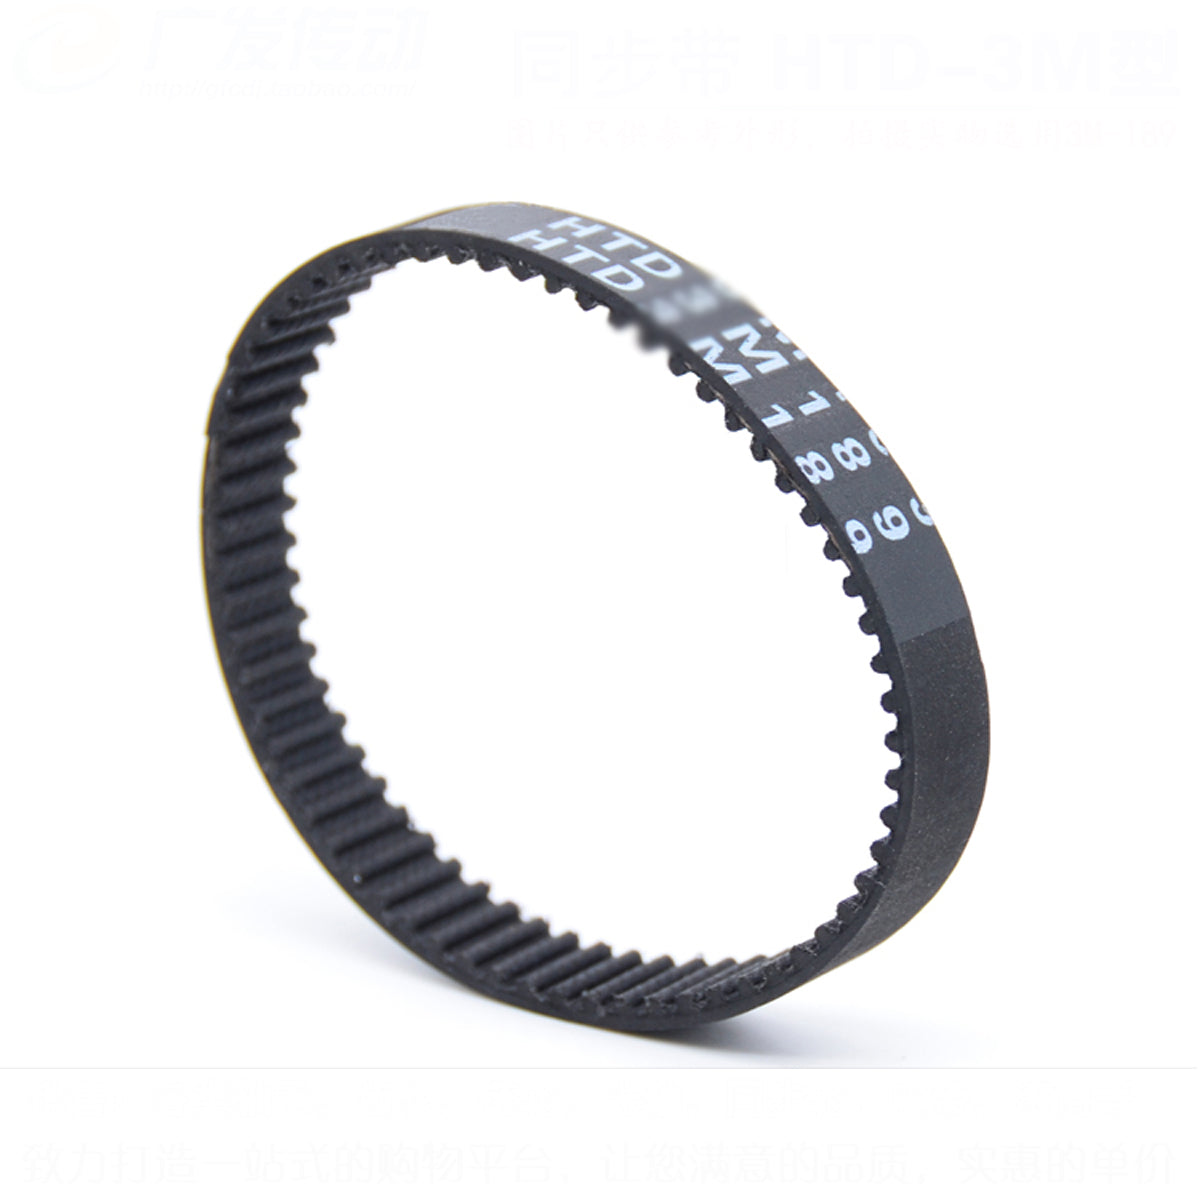 Pitch Length 148 mm Width 3 mm HTD 2M Closed Timing Belt